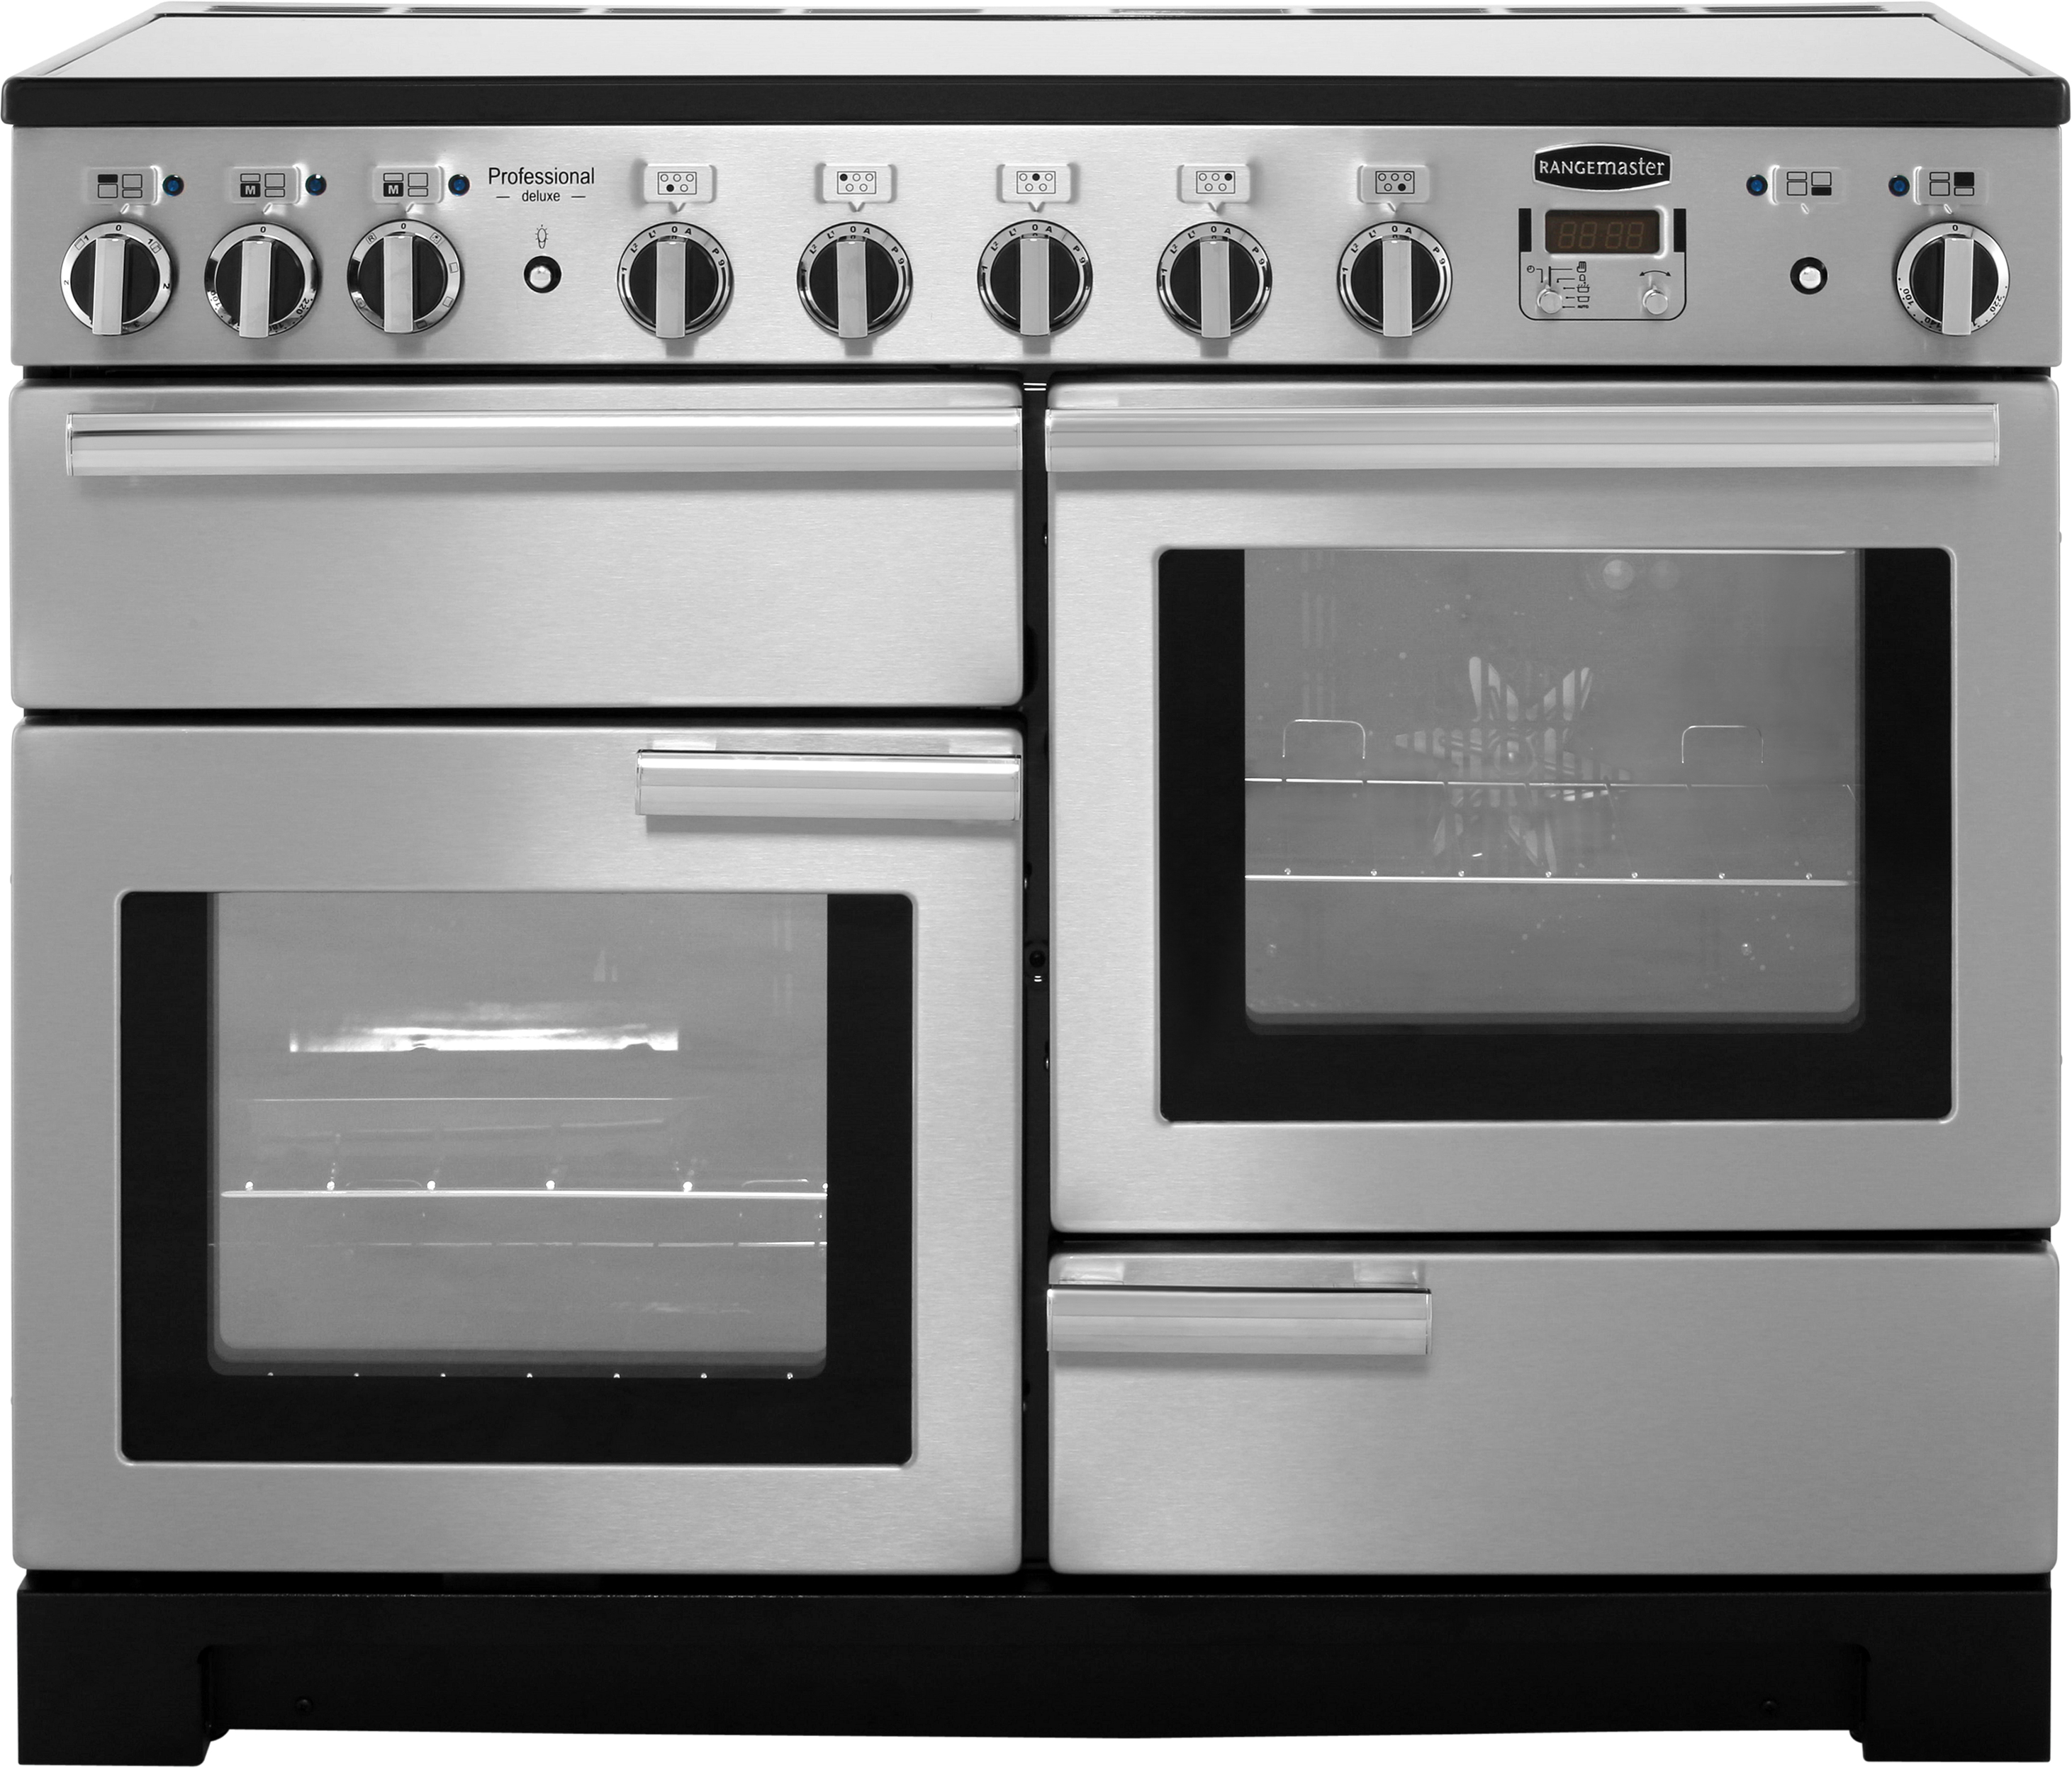 Rangemaster Professional Deluxe PDL110EISS/C 110cm Electric Range Cooker with Induction Hob - Stainless Steel / Chrome - A/A Rated, Stainless Steel